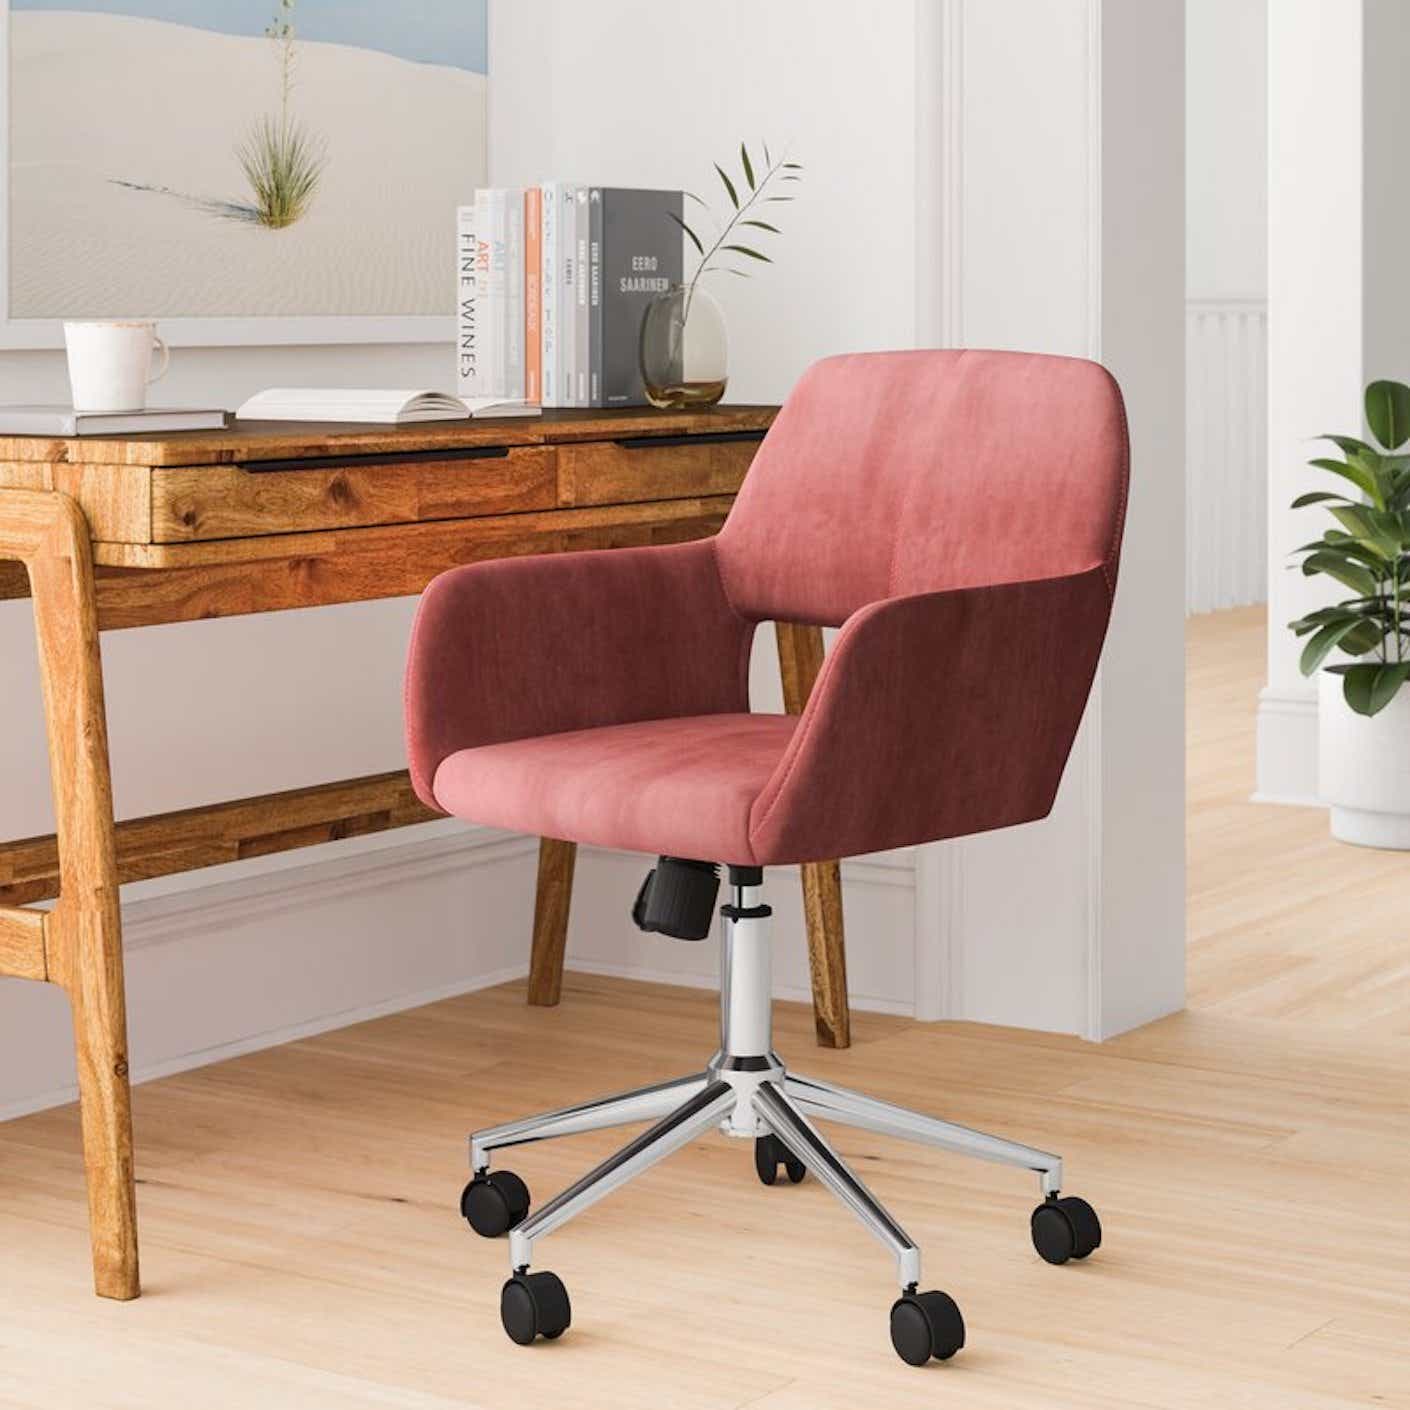 Eliana Task Chair in front of a work desk